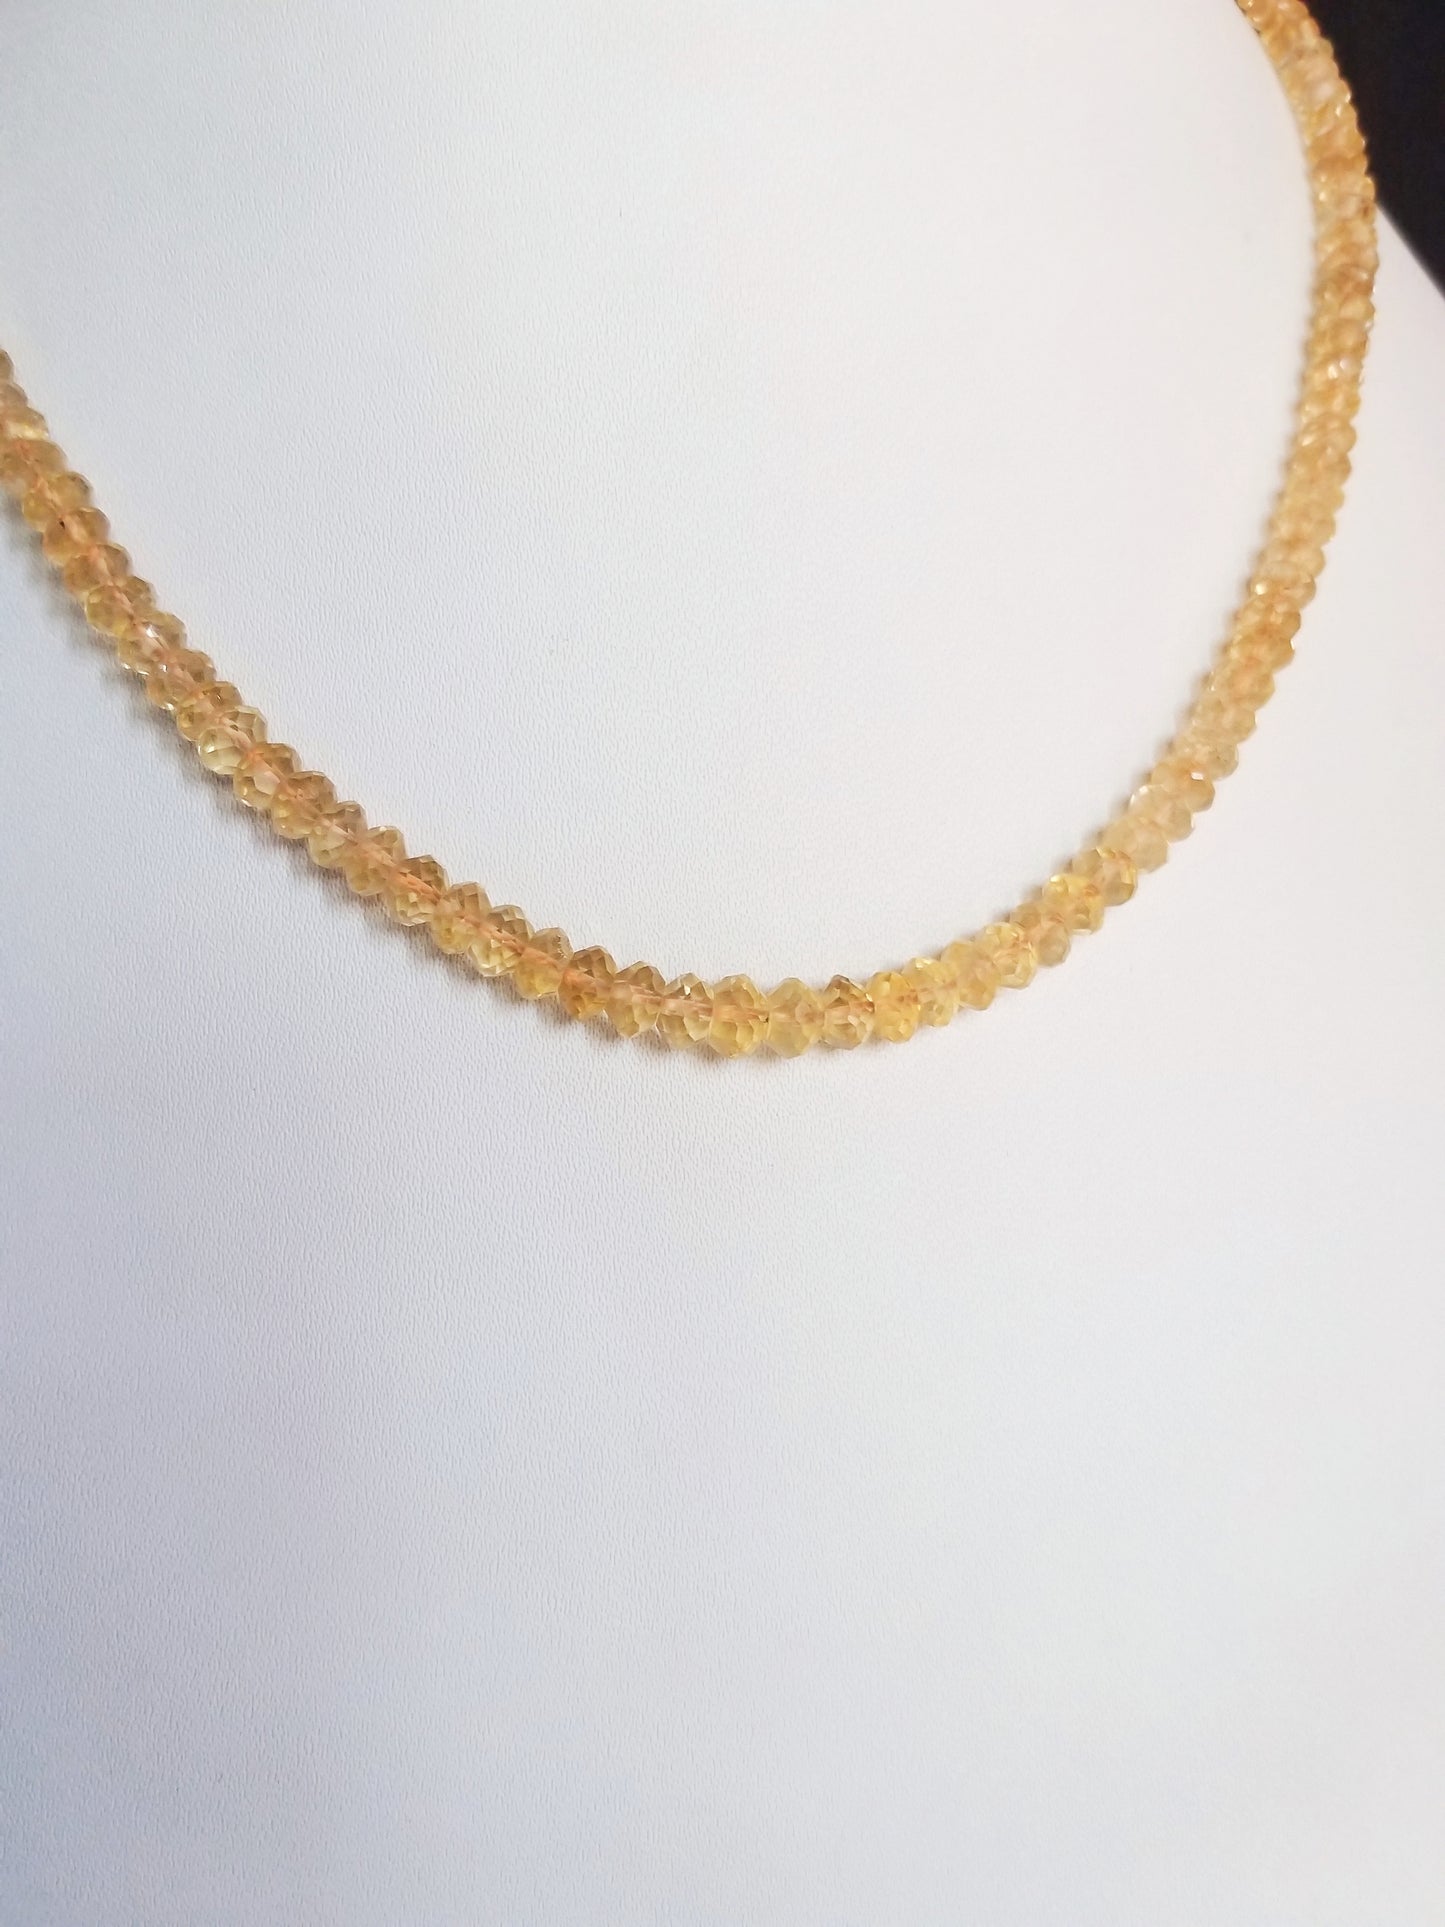 Natural Citrine Beads Necklace, Delicate Beaded Necklace